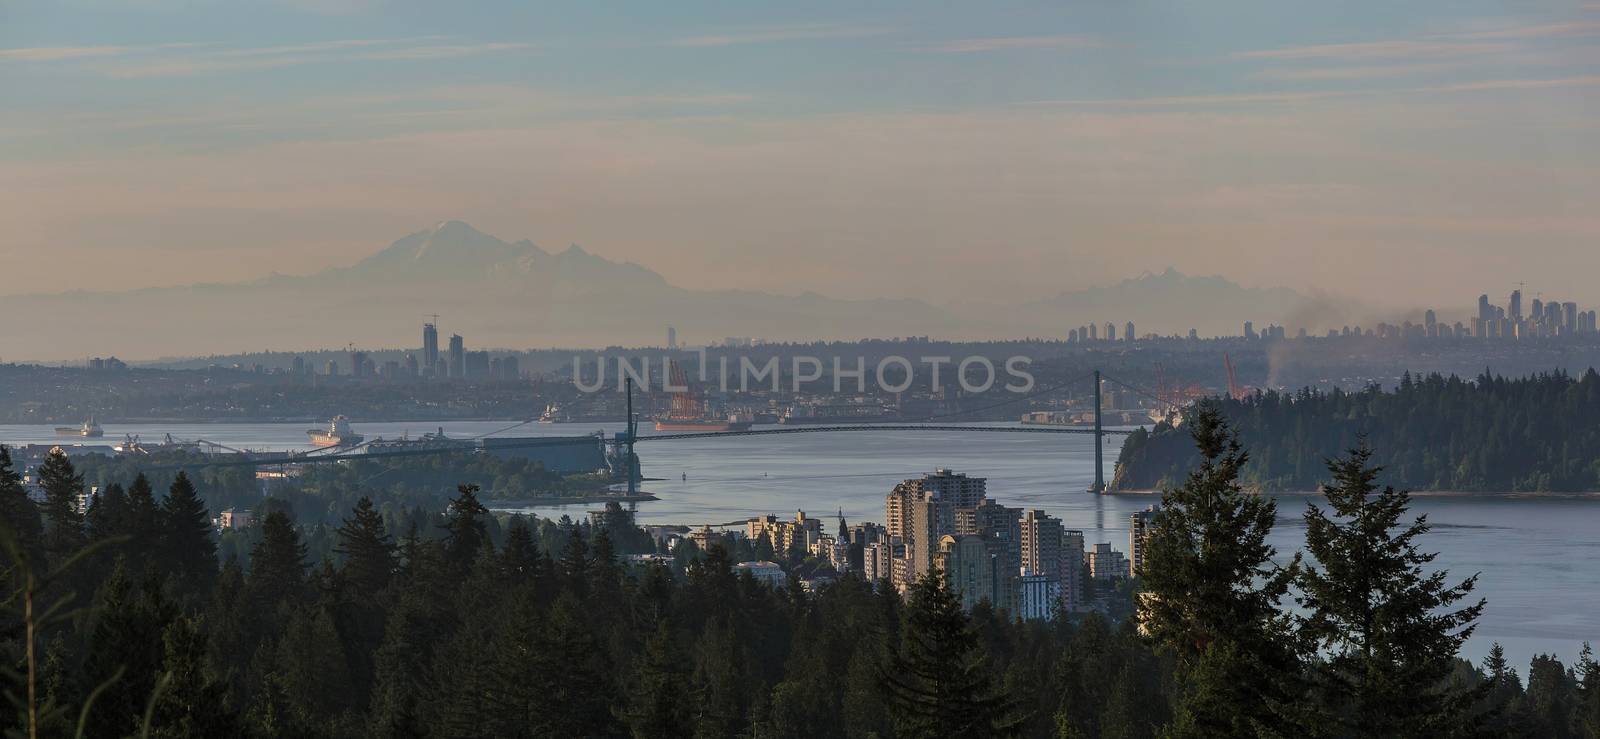 Morning view of Vancouver and Burnaby BC Panorama by jpldesigns